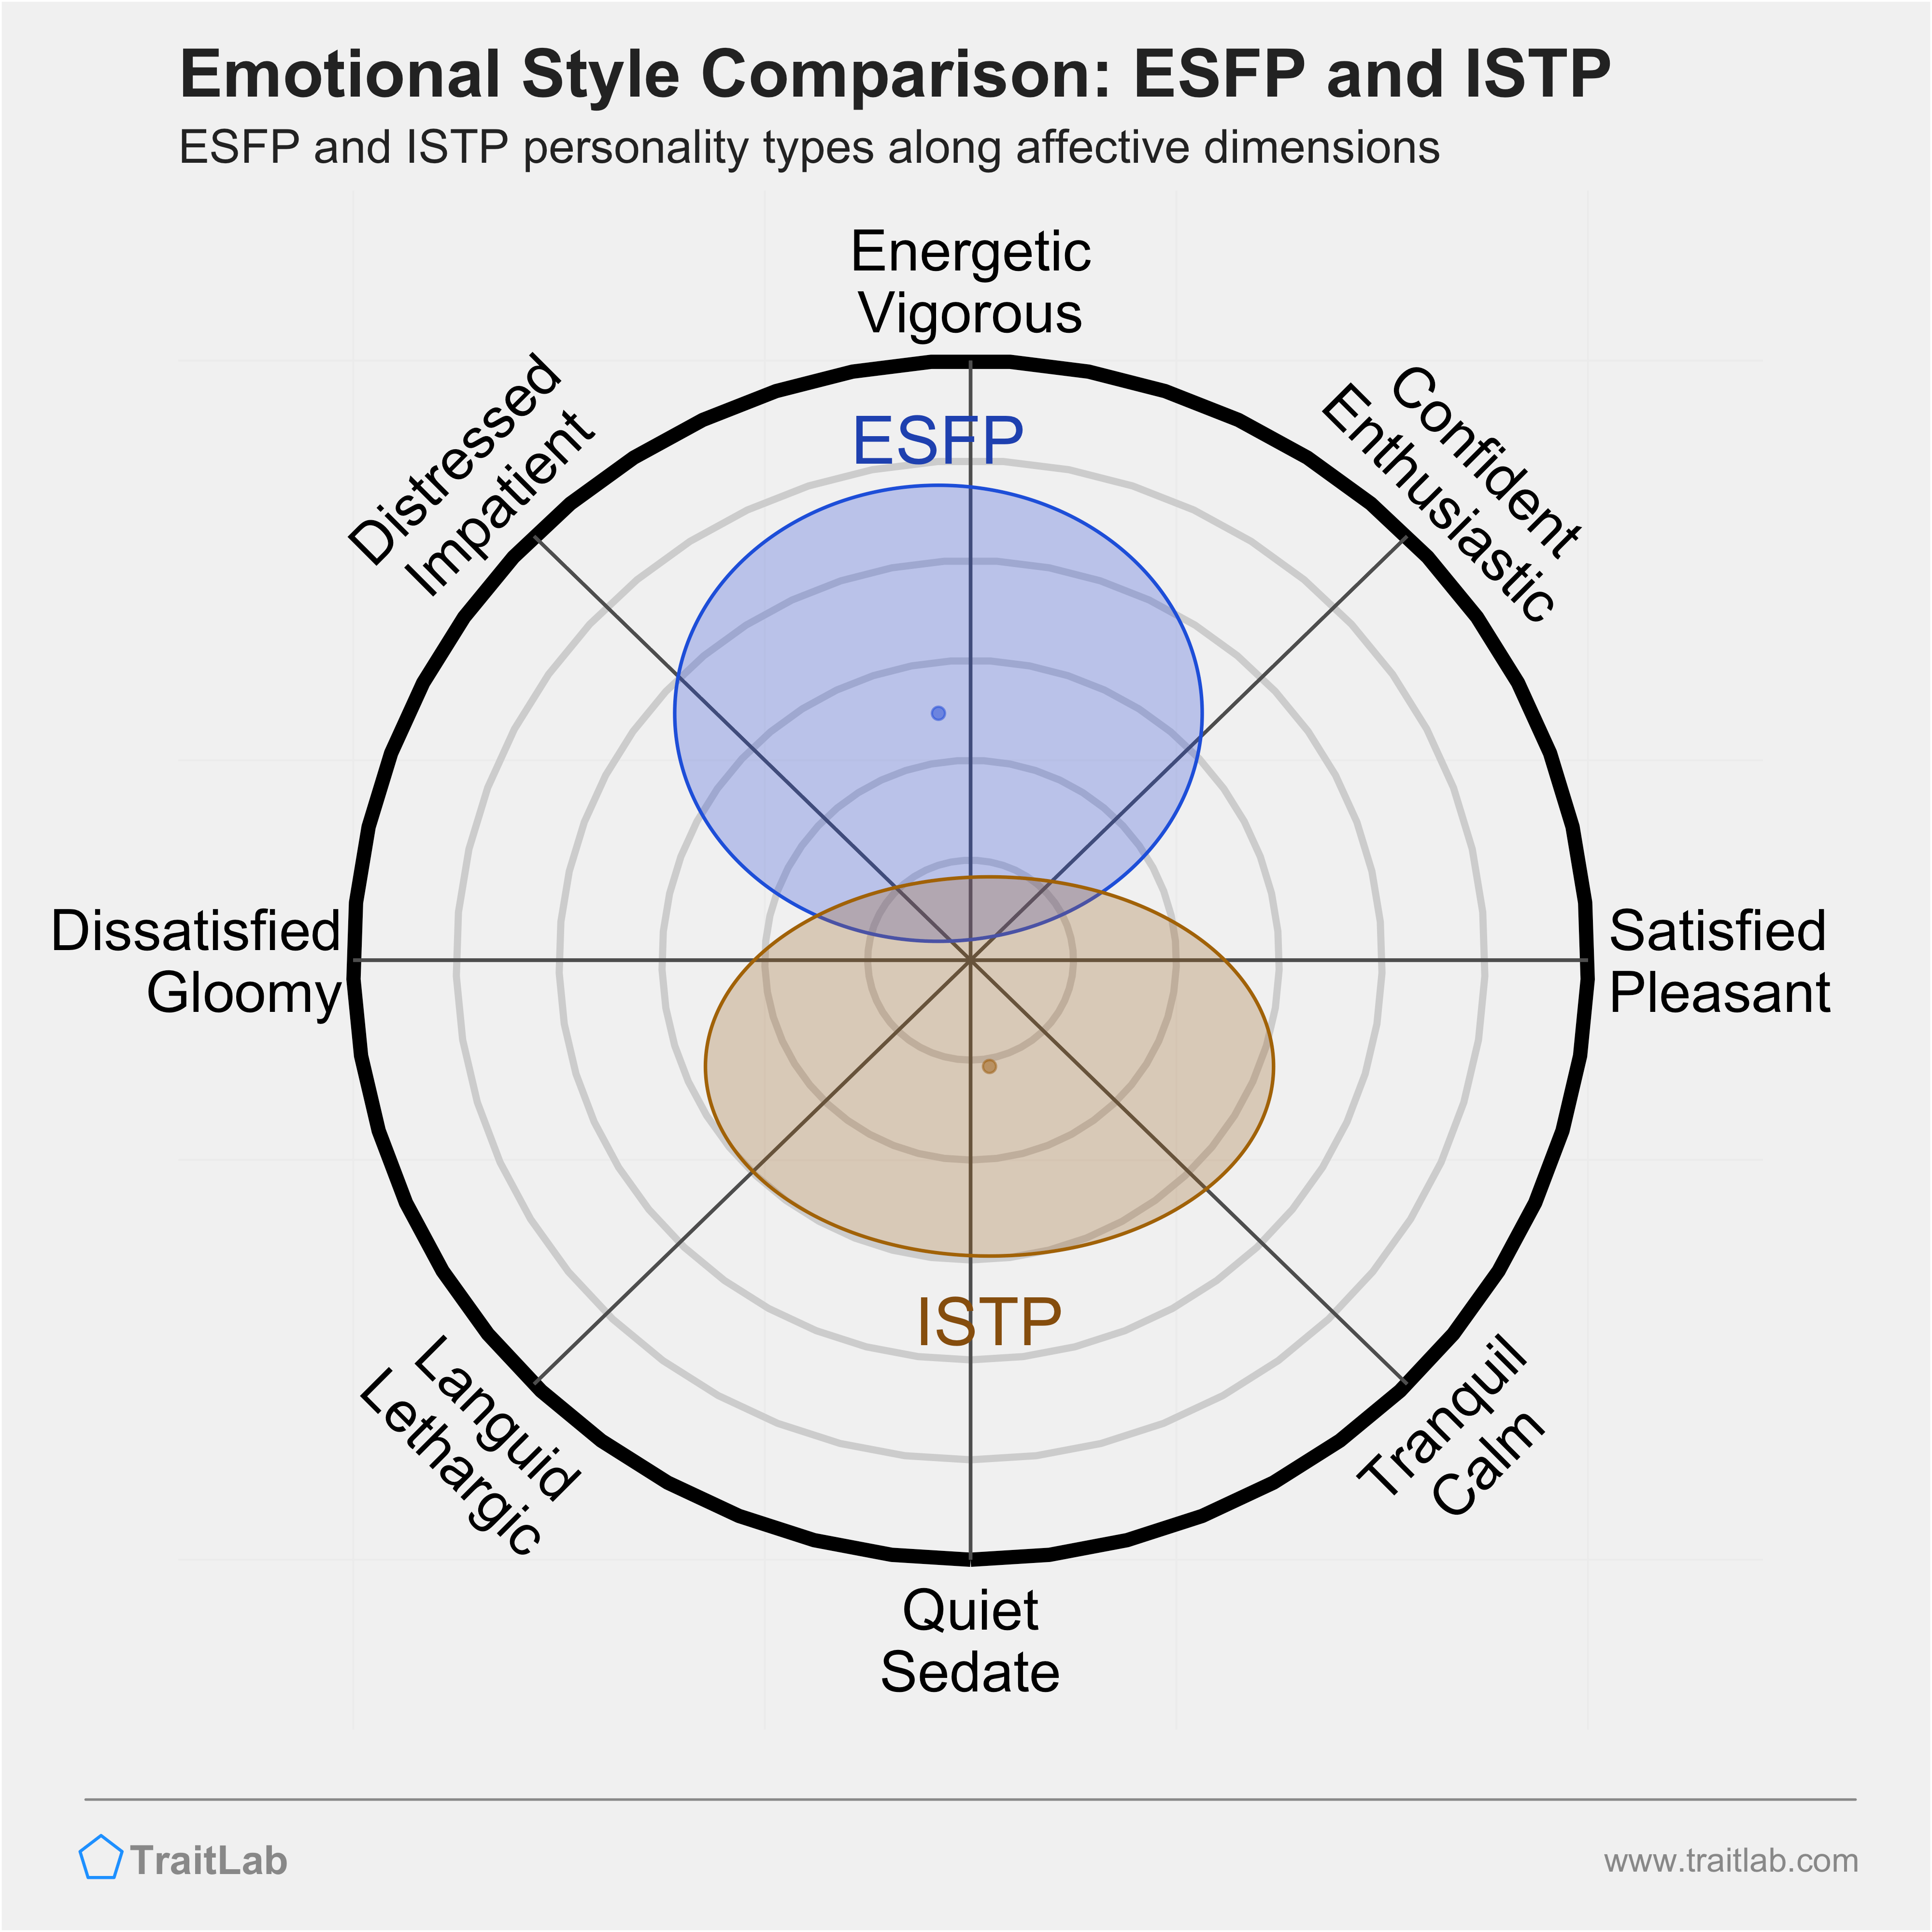 ESFP and ISTP comparison across emotional (affective) dimensions